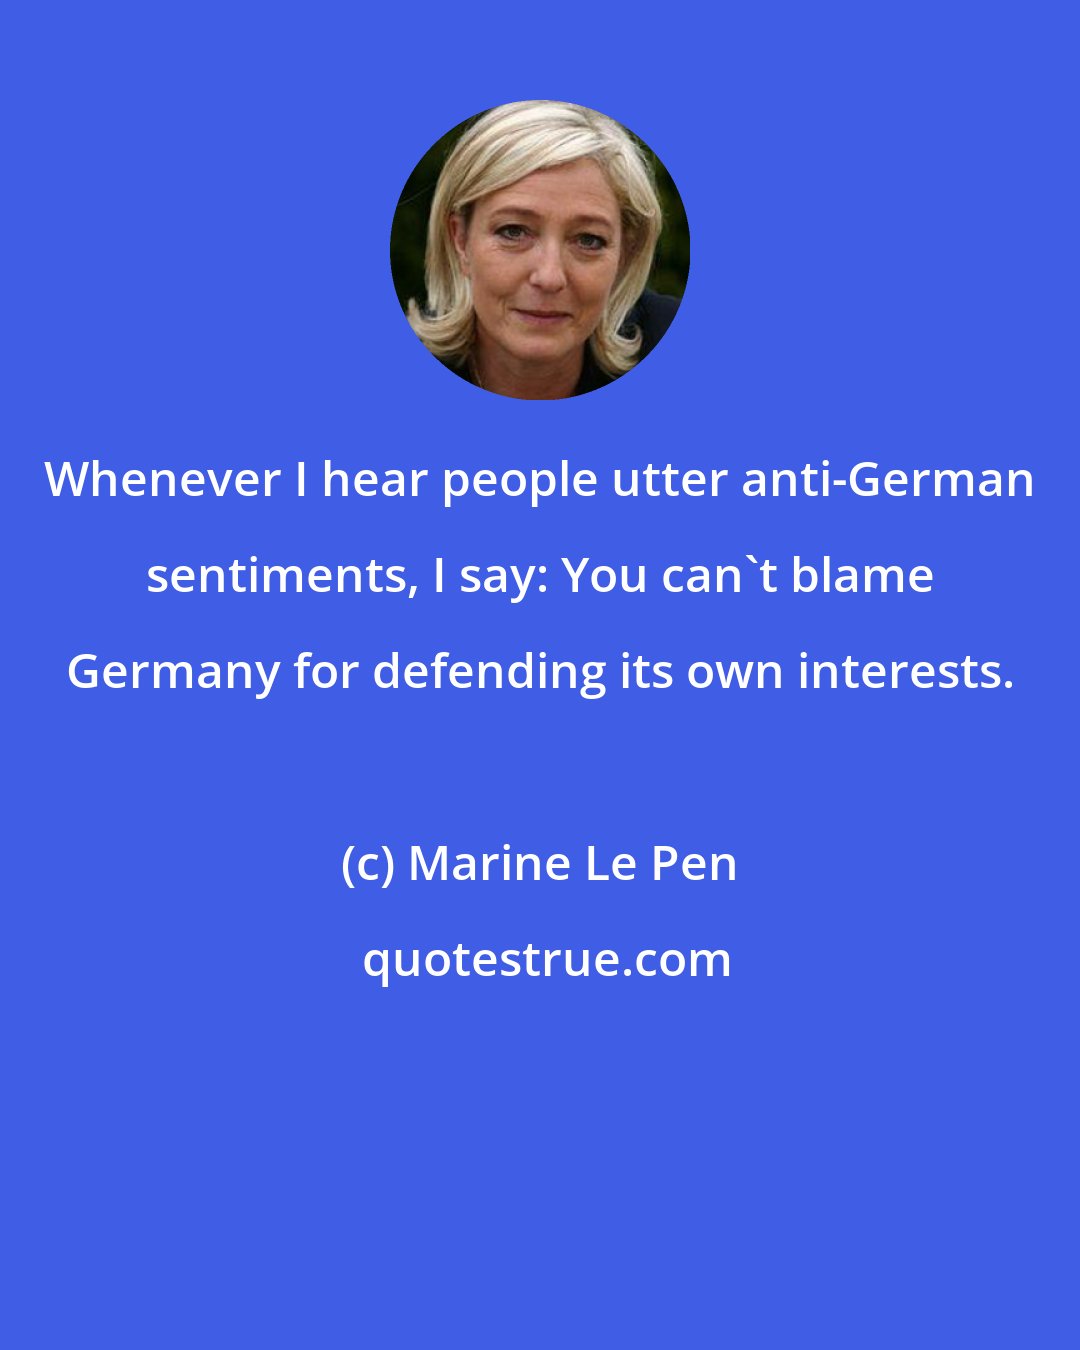 Marine Le Pen: Whenever I hear people utter anti-German sentiments, I say: You can't blame Germany for defending its own interests.